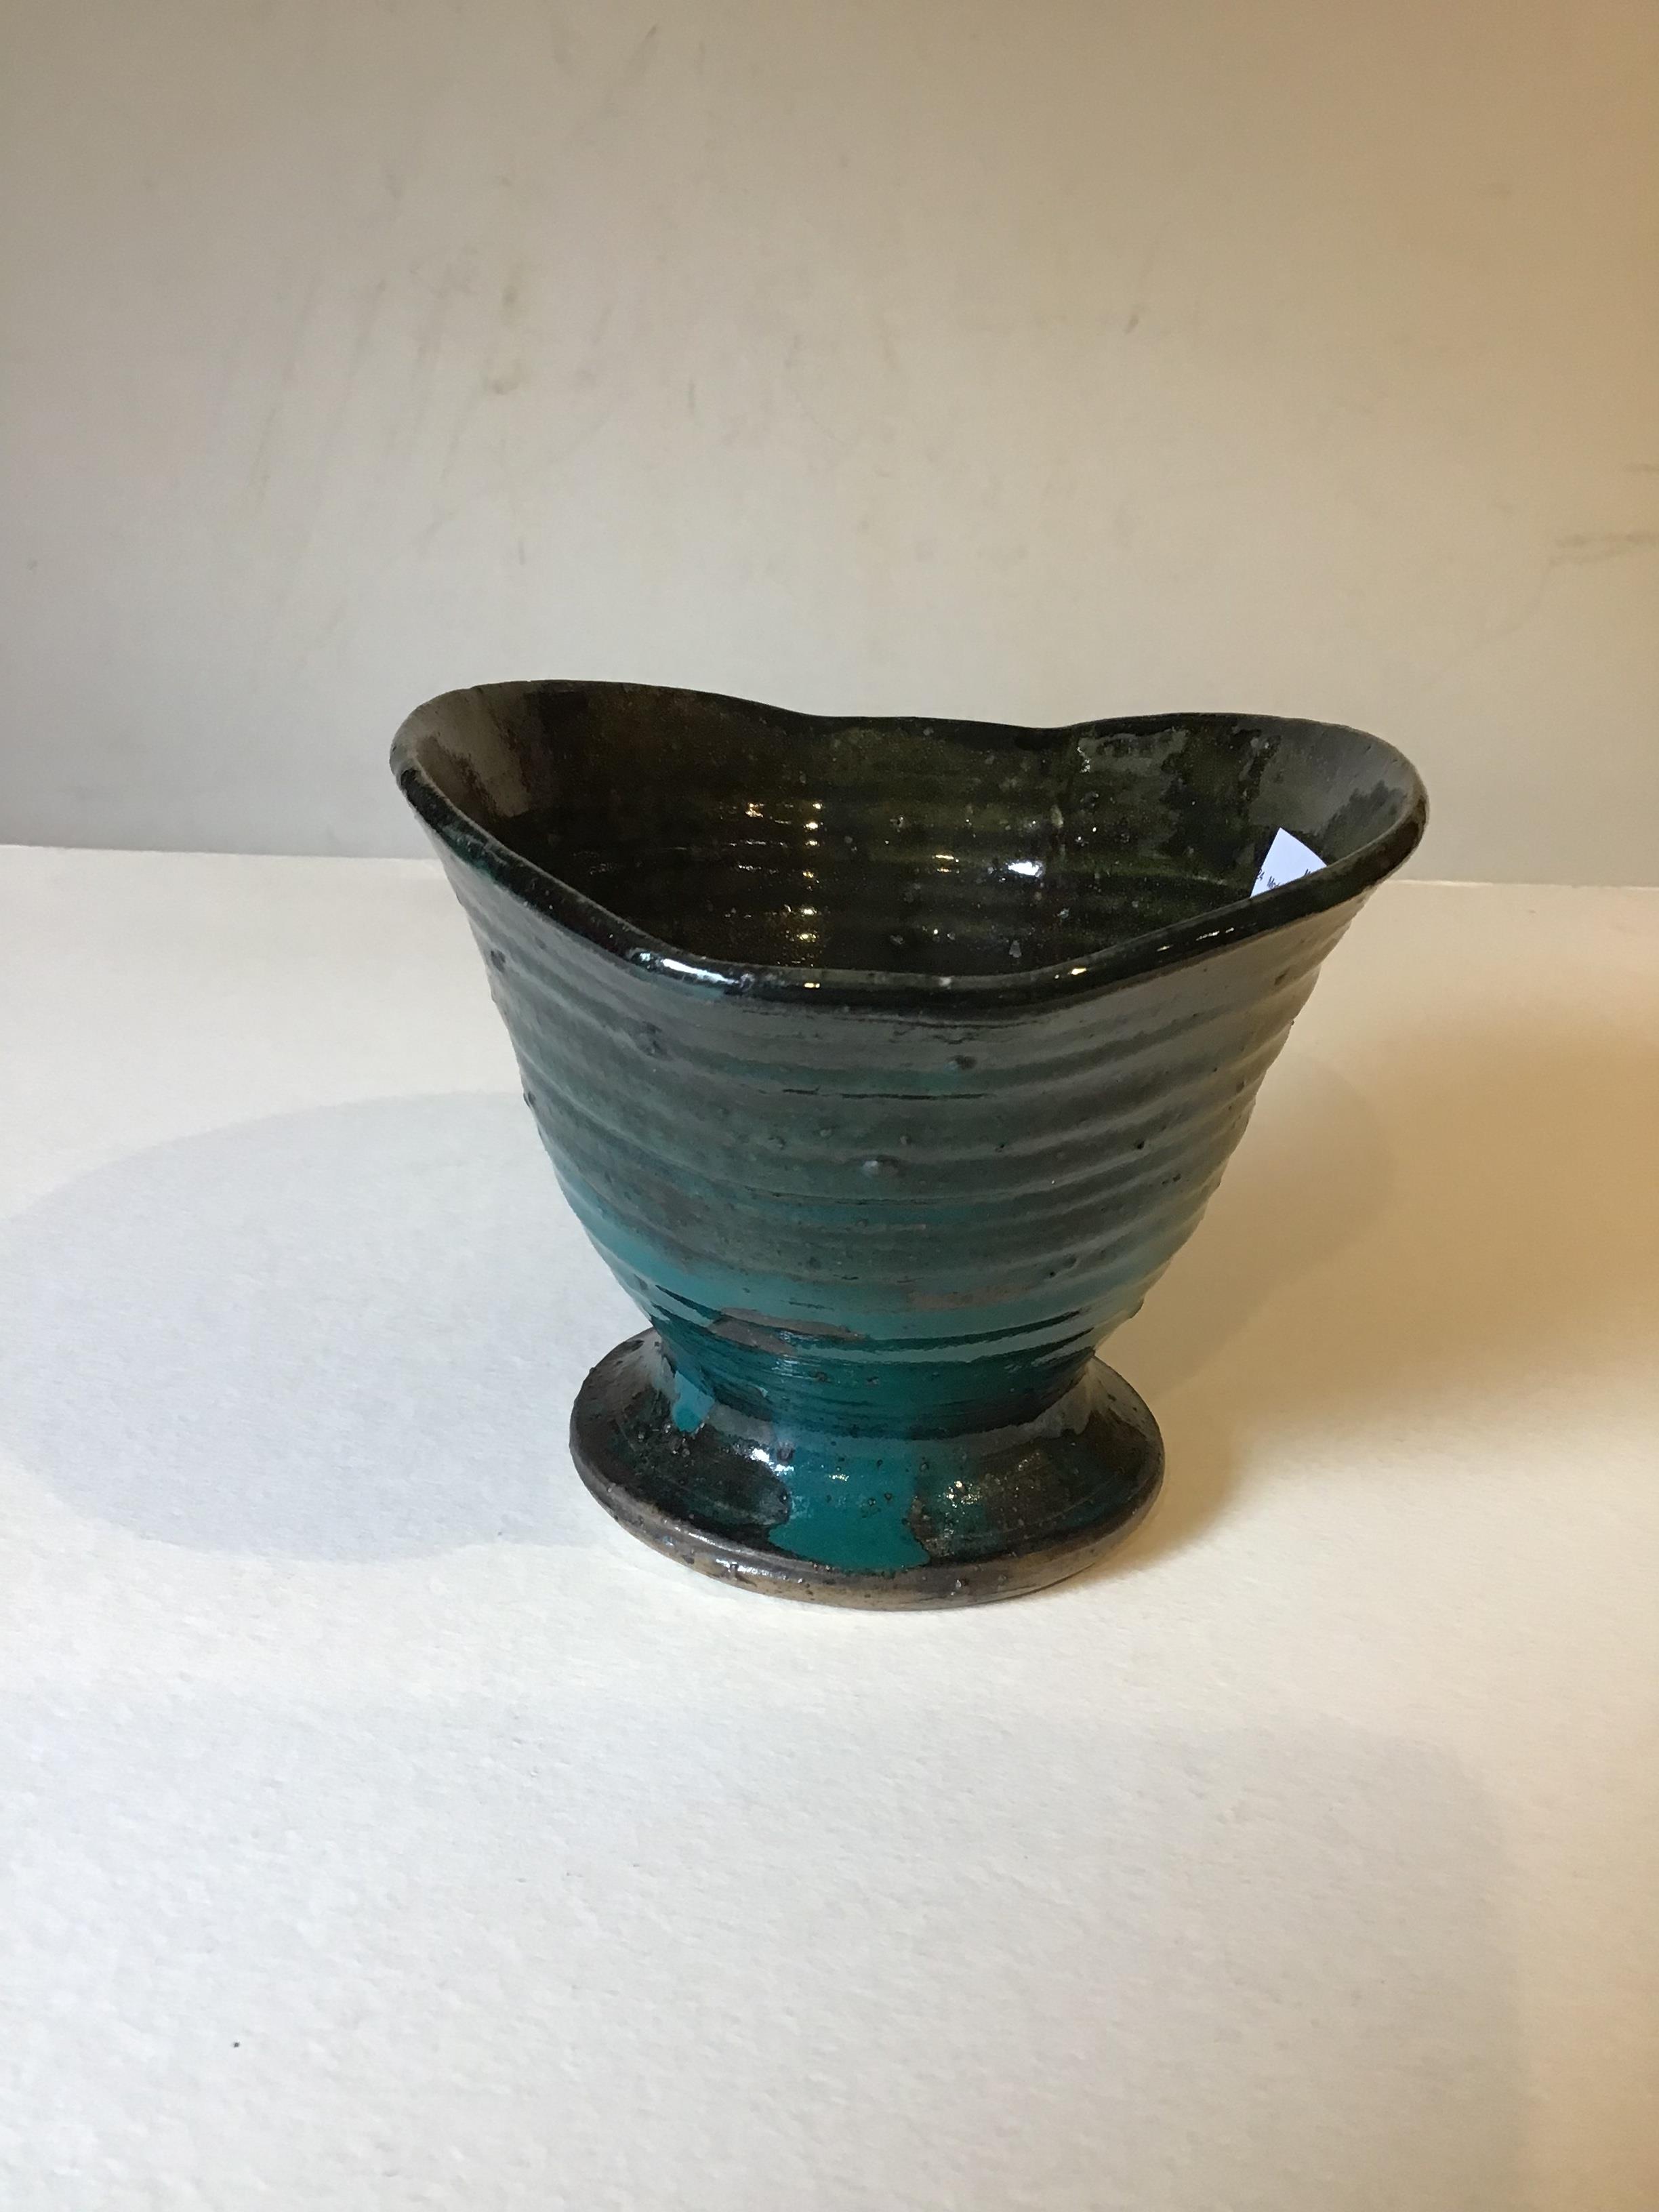 Rosemary Wren (1922-2013) at Oxshott Pottery Bowl squeezed form with green and dark glaze - Image 12 of 17